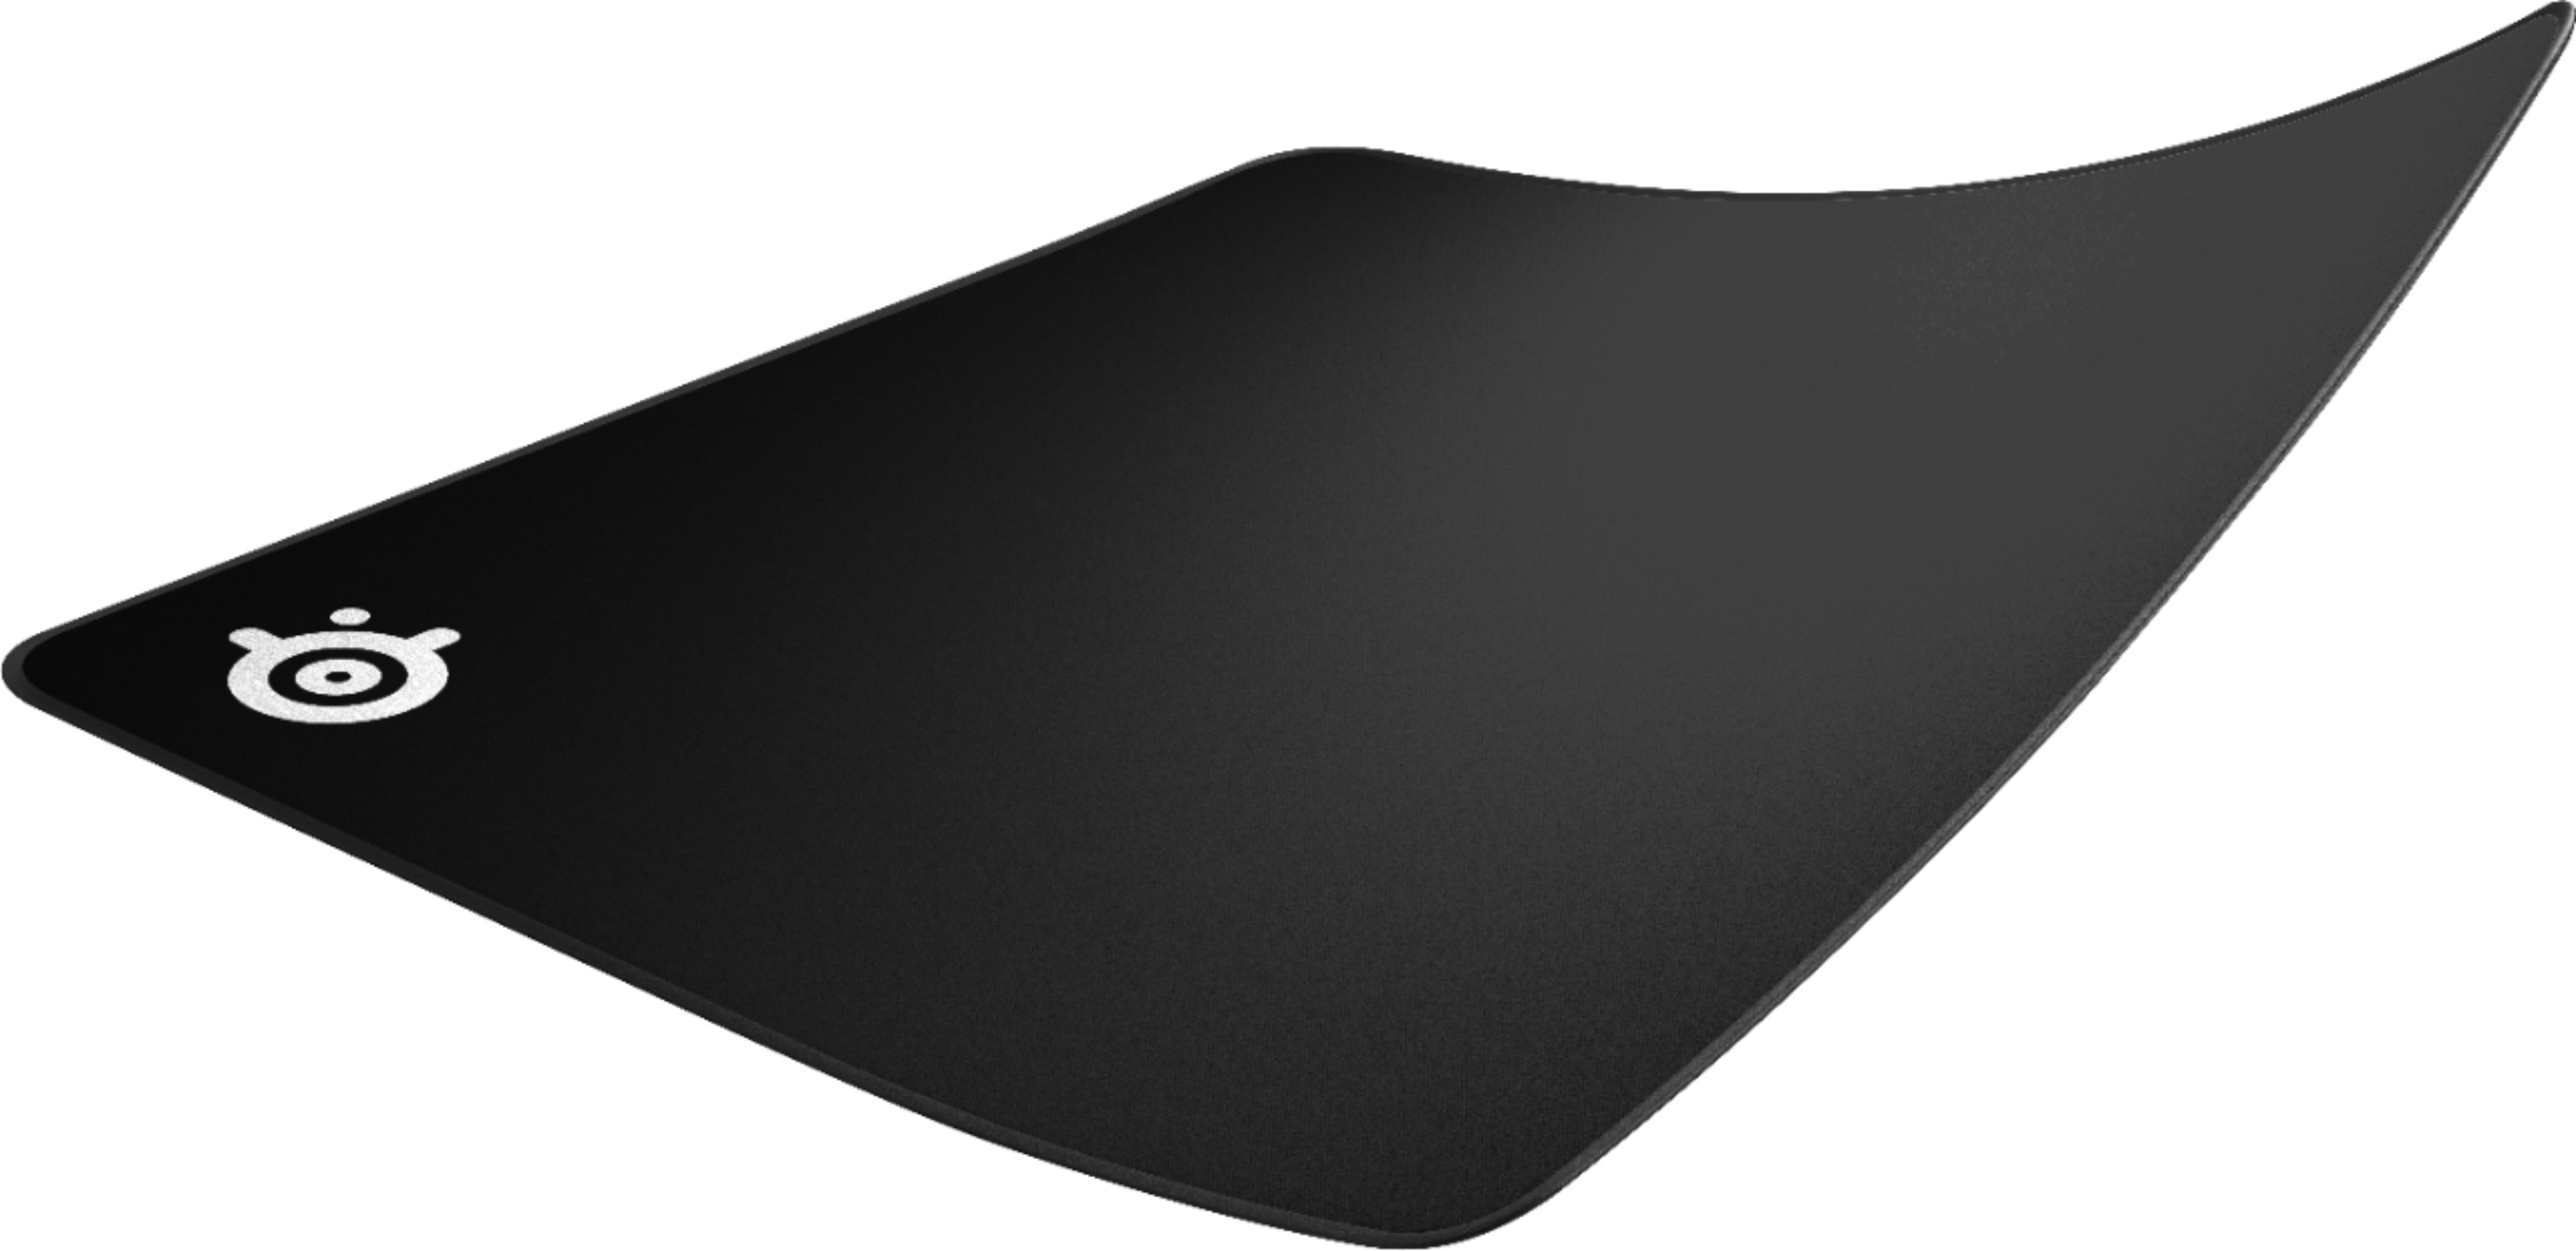 WHFDSBD900X400X3Mm Mousepad Large Gaming Mouse Pad Lock Edge Mouse Mat Keyboard Pad 